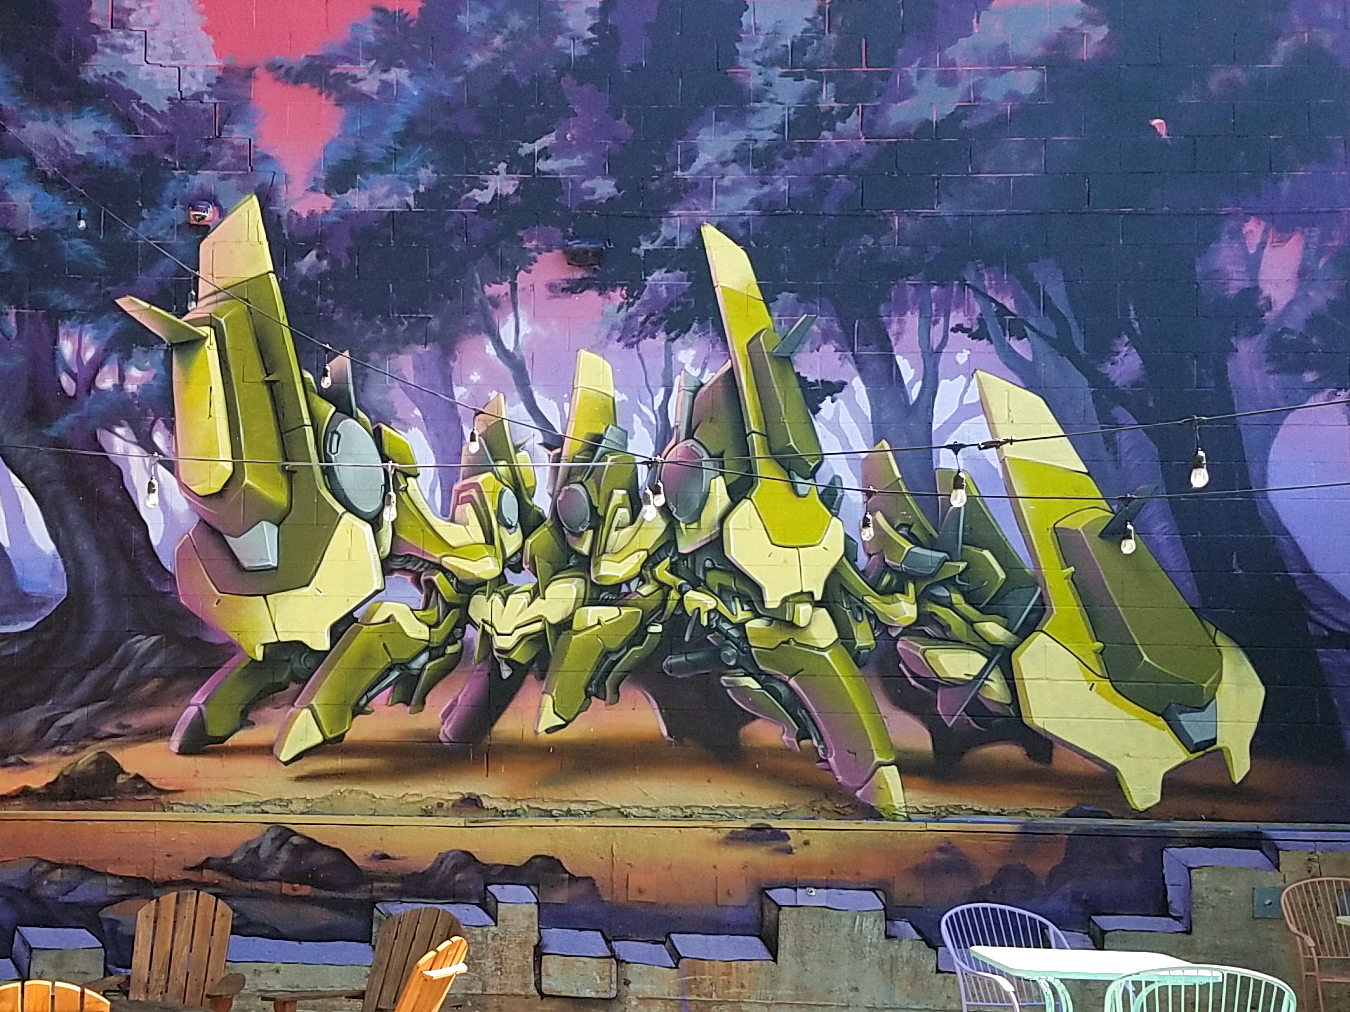 The wall facing the beltline contains one of Totem's iconic tactical Dreadnought Letter Mech works.